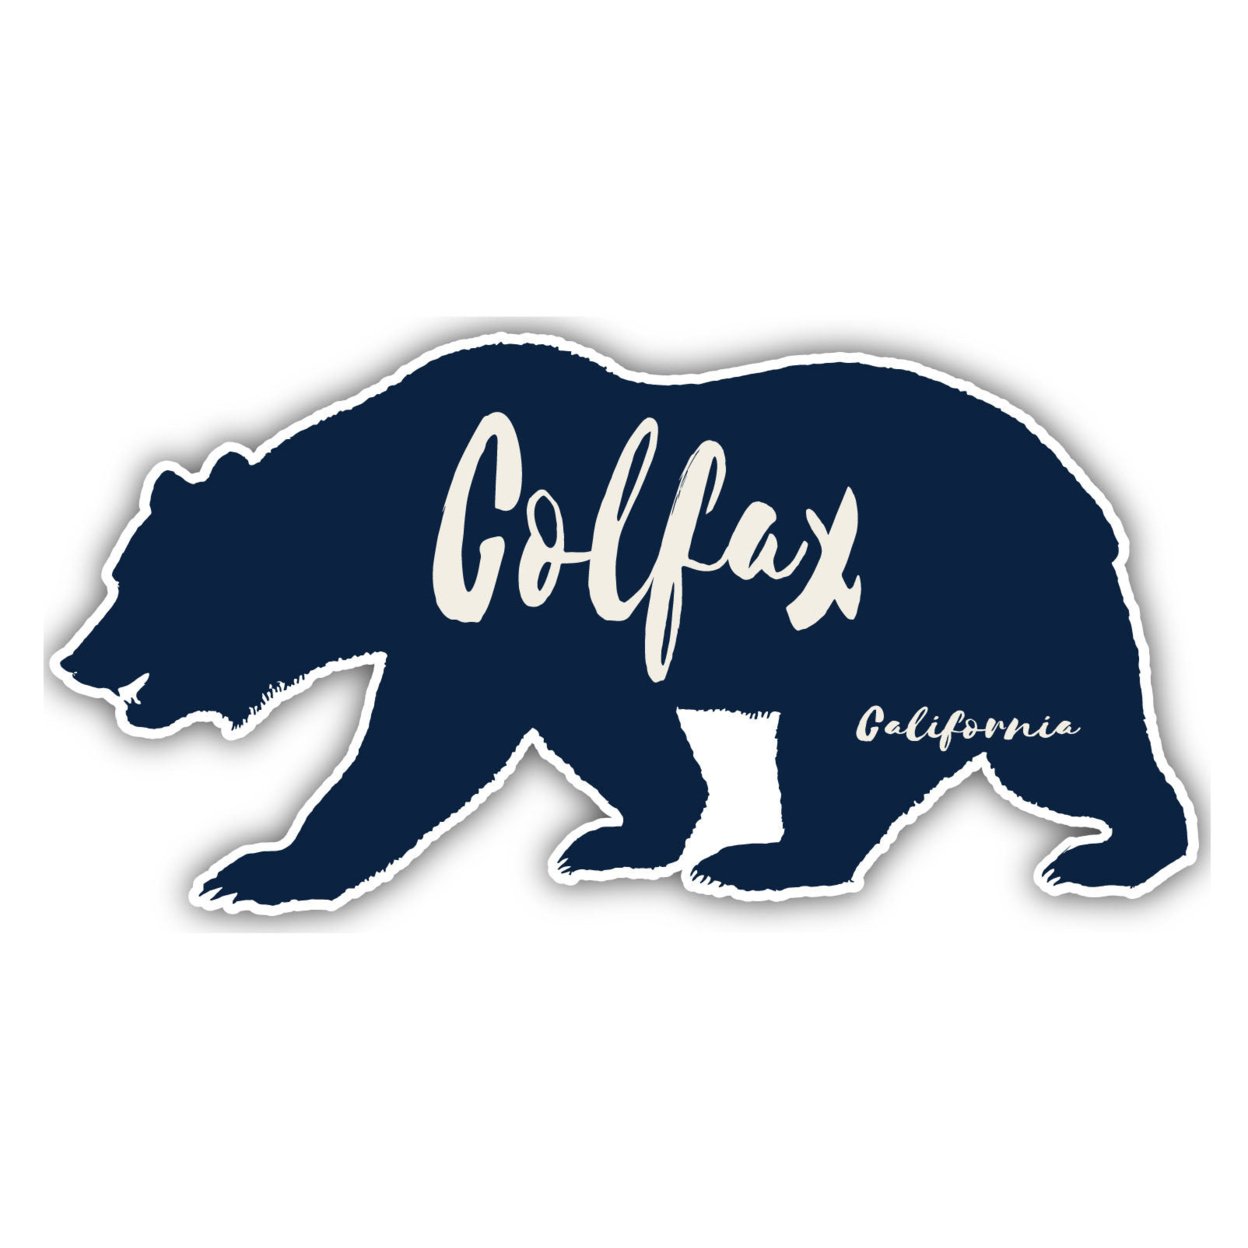 Colfax California Souvenir Decorative Stickers (Choose Theme And Size) - 4-Pack, 2-Inch, Bear